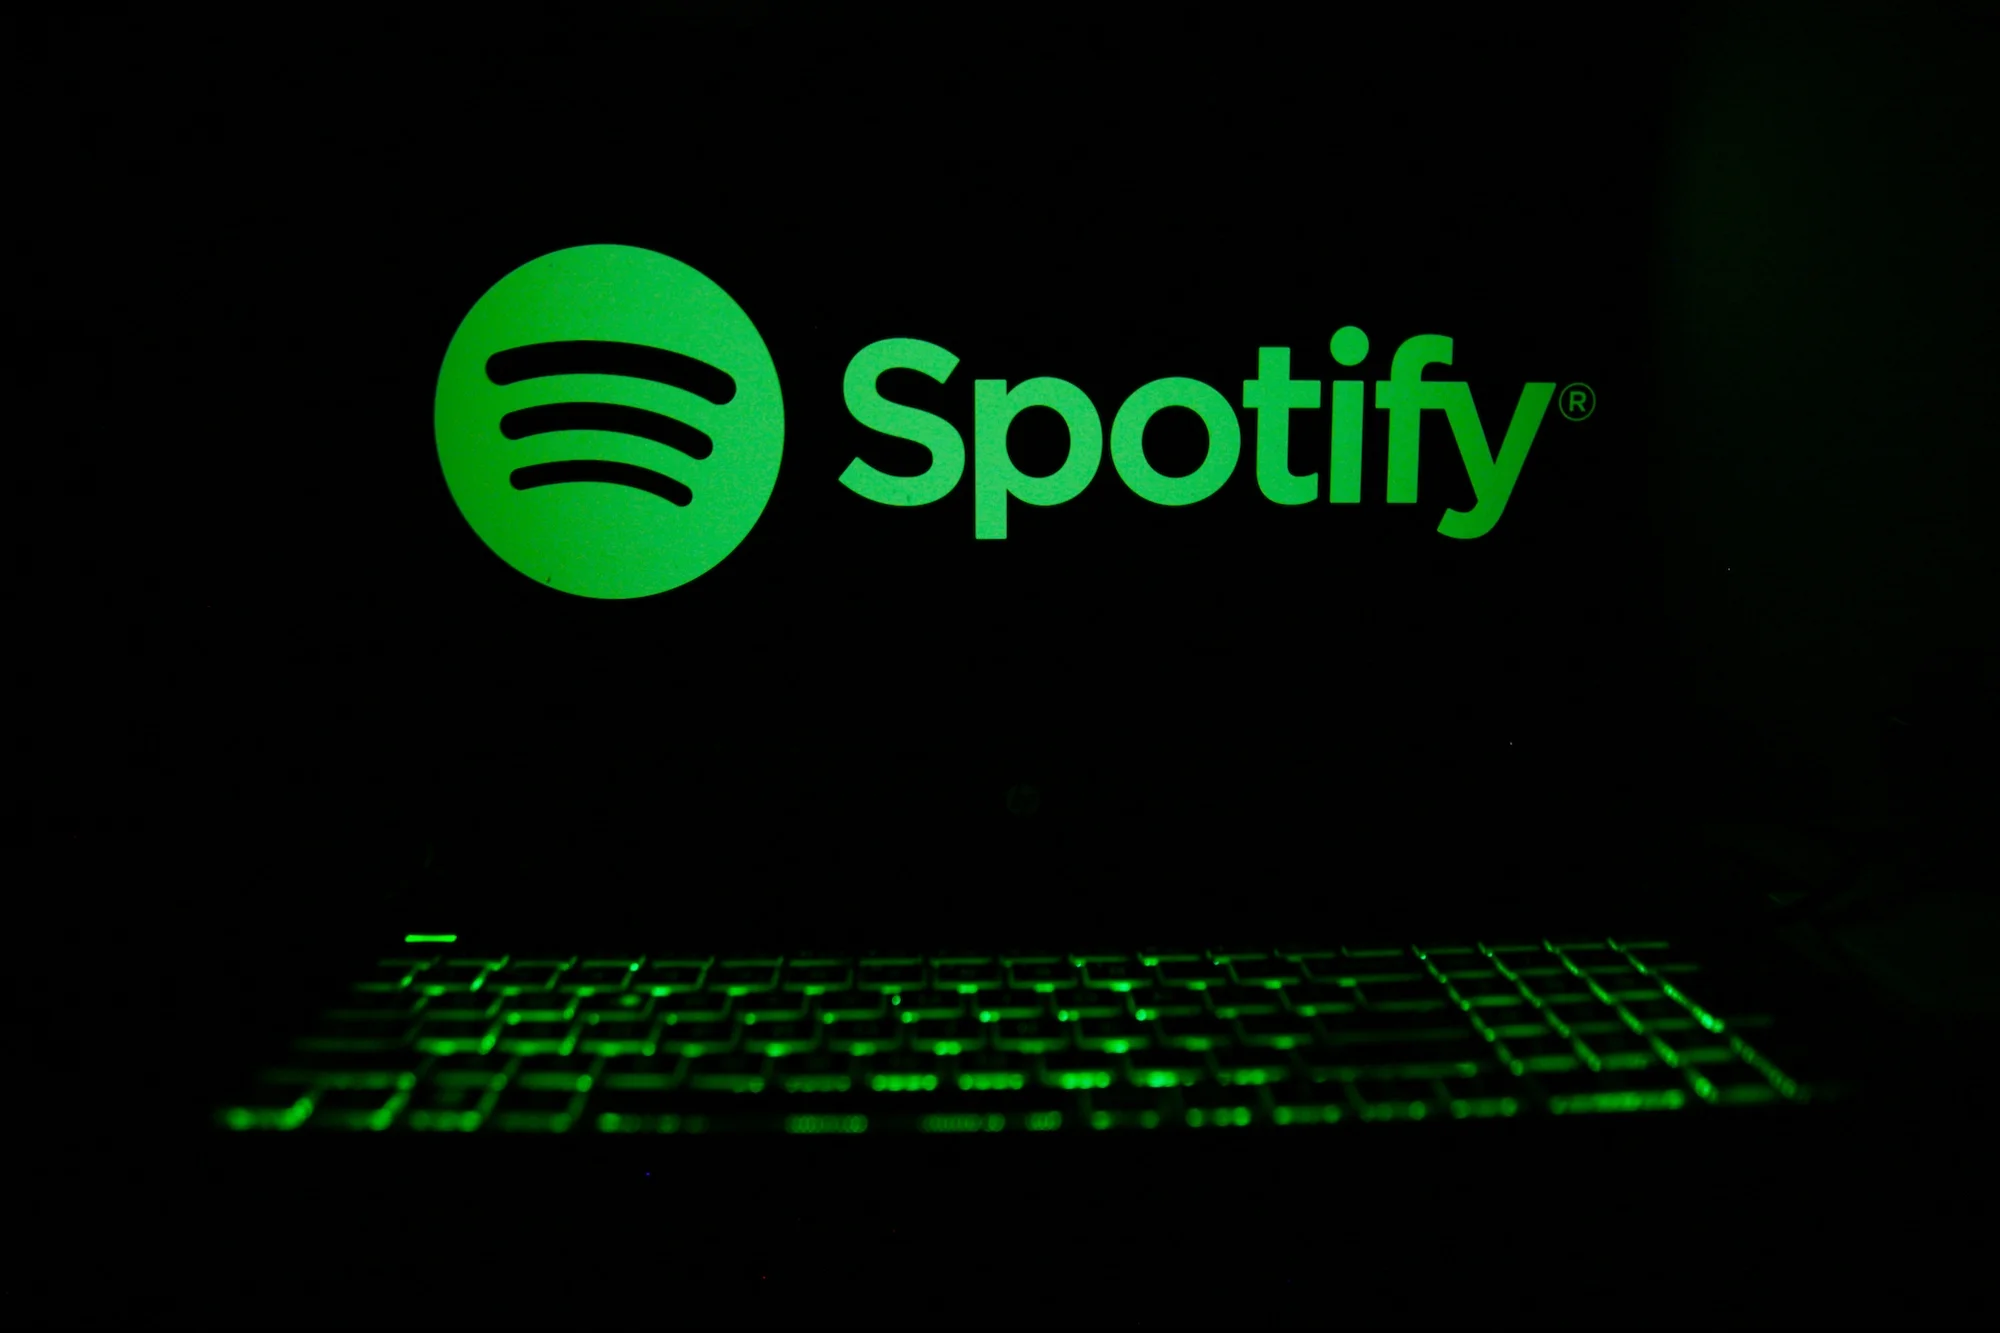 Spotify Is Set To Raise Prices in Strategic Markets